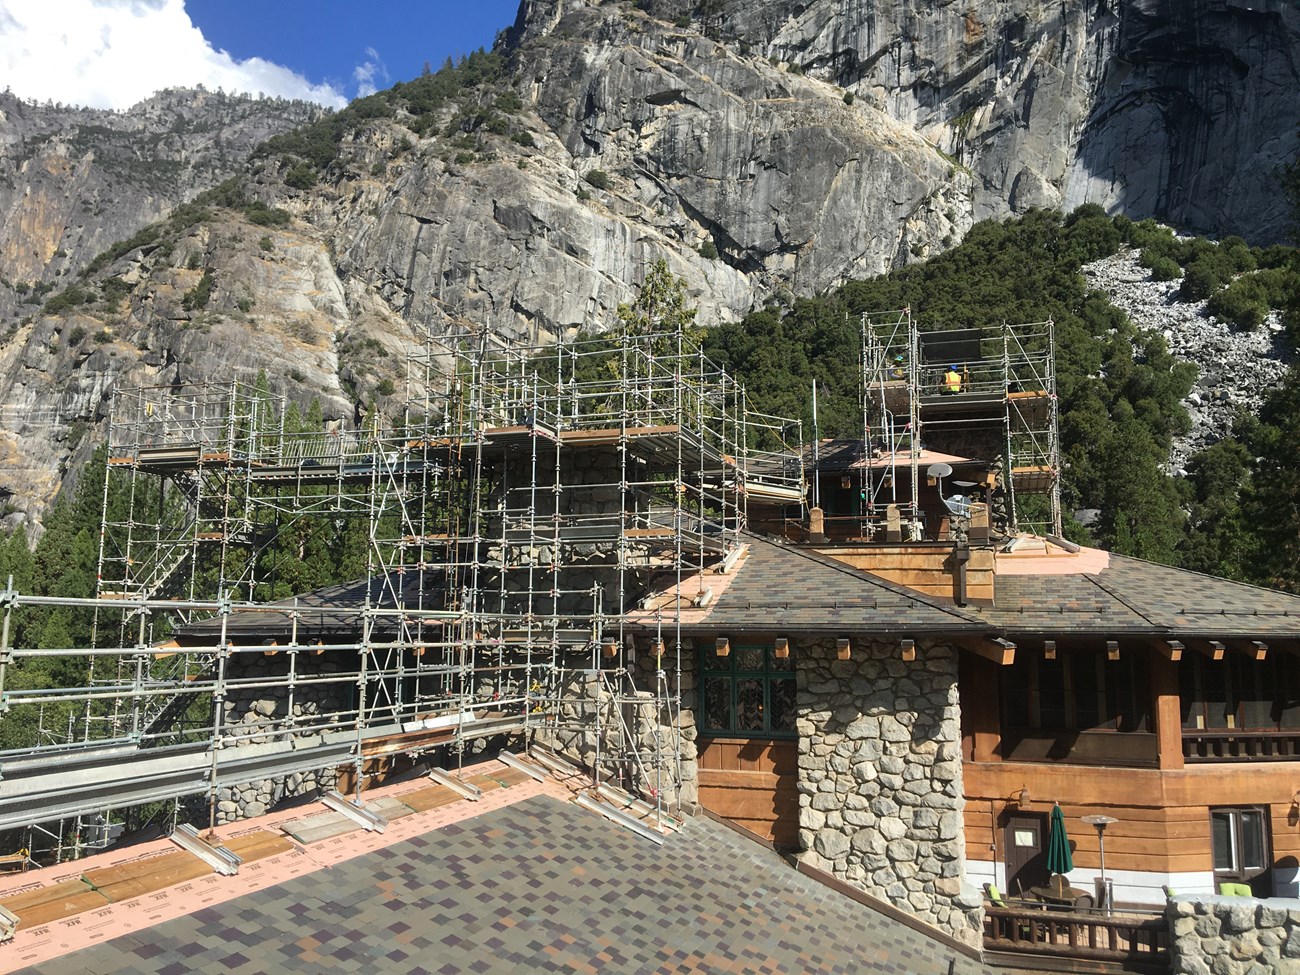 Exterior scaffolding installed on the outside of stone and wooden structure with a large granite mountain in the background.